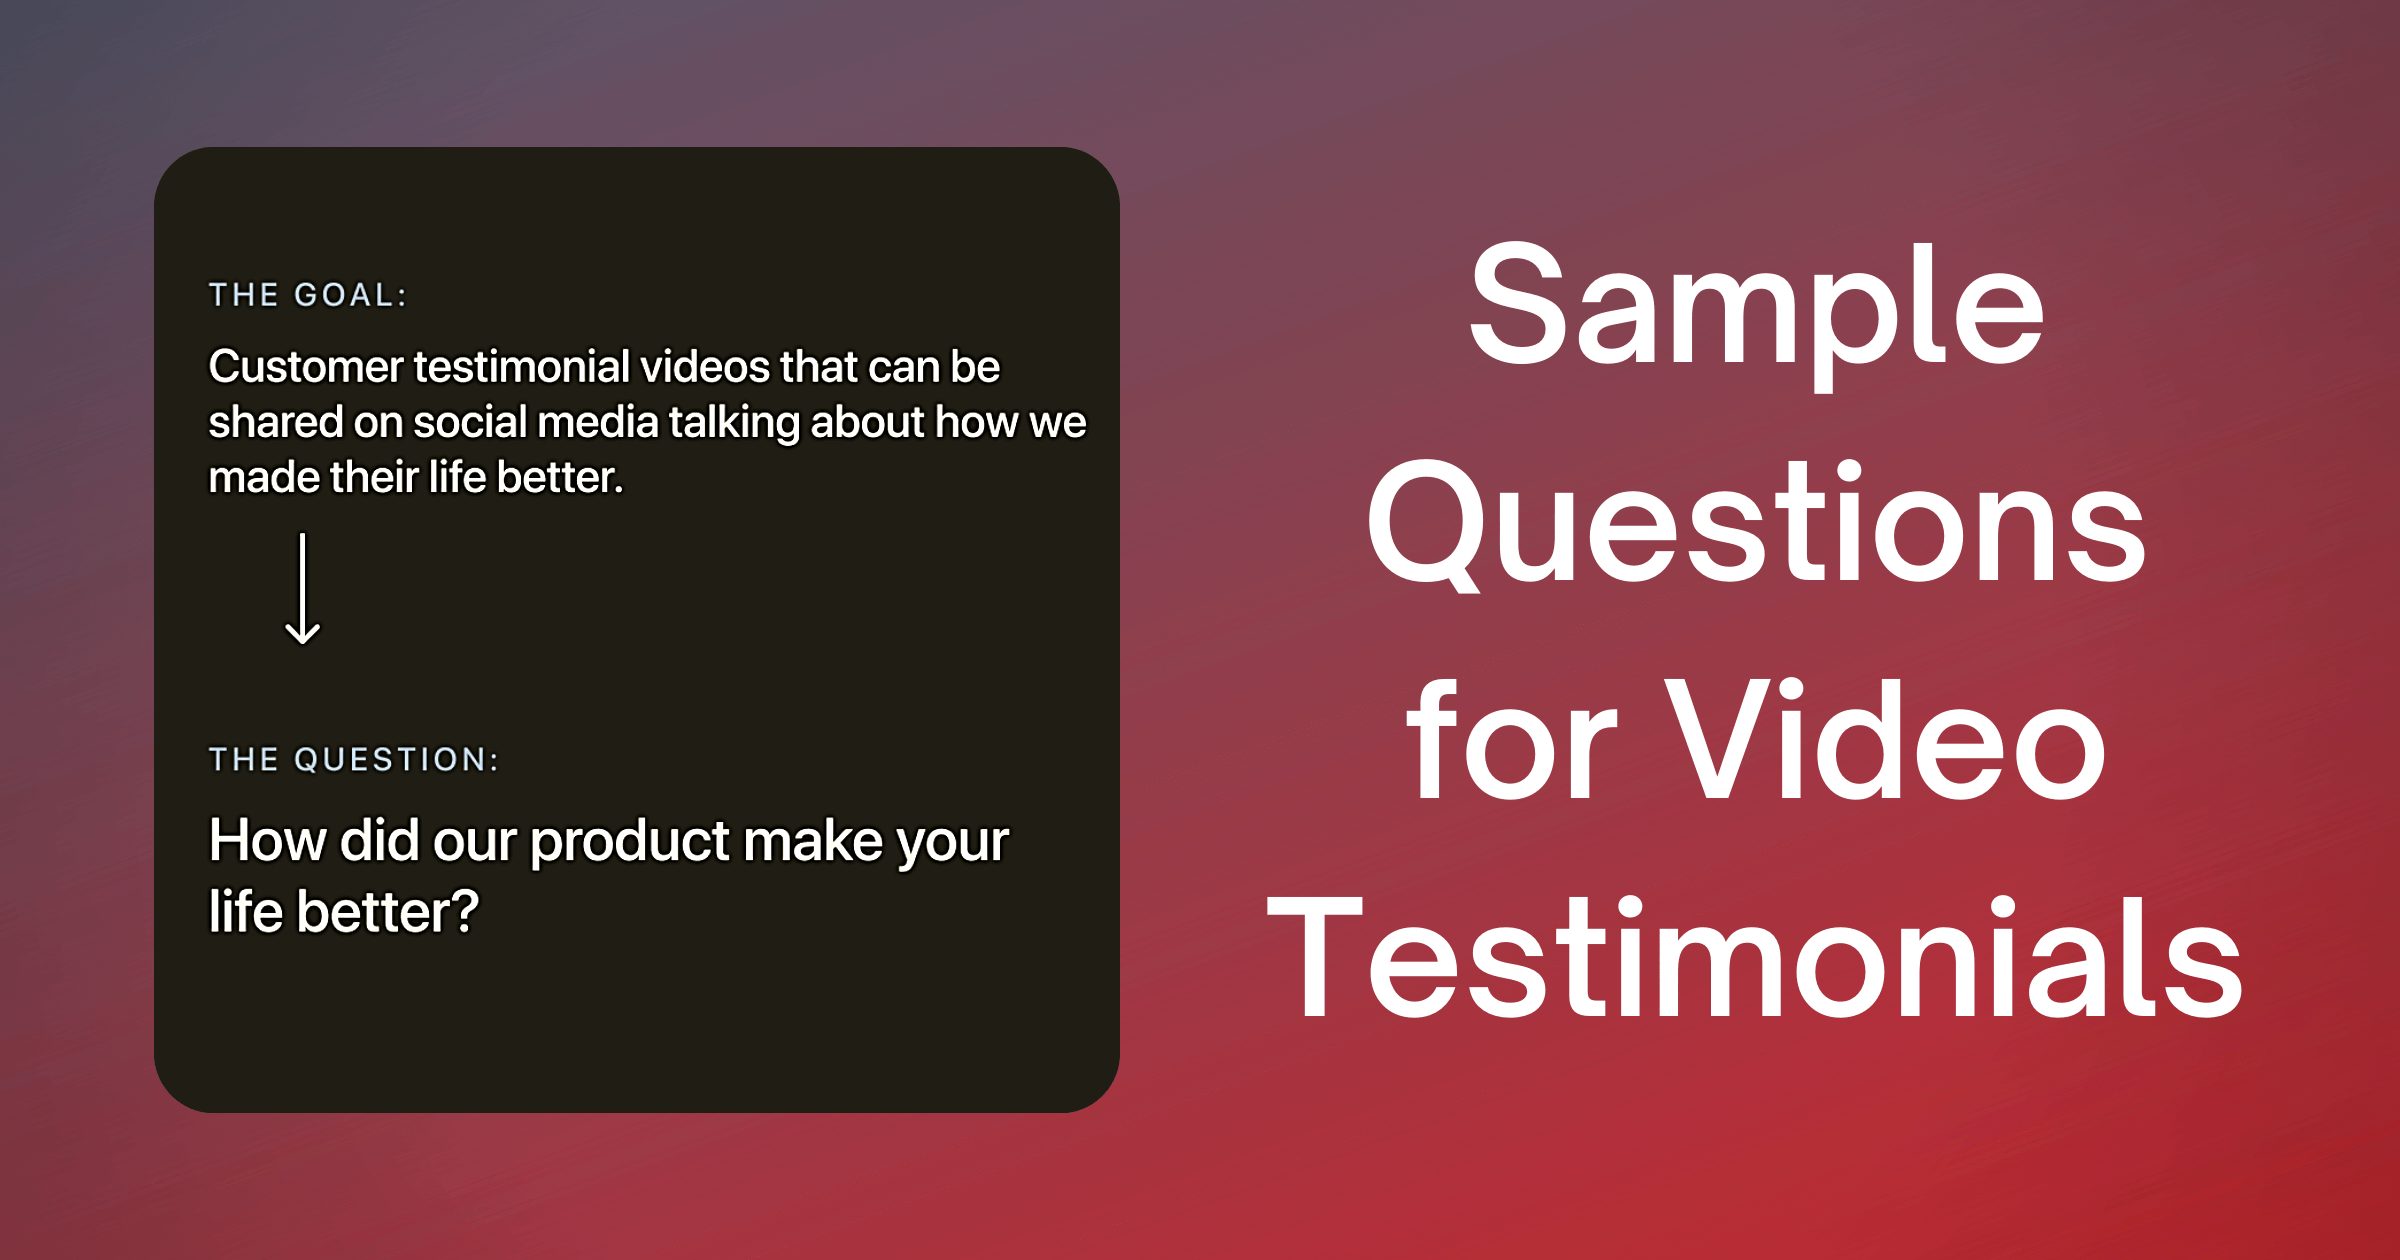 You Don’t Need 25 Questions for Your Next Customer Video Testimonial. Here’s Why.